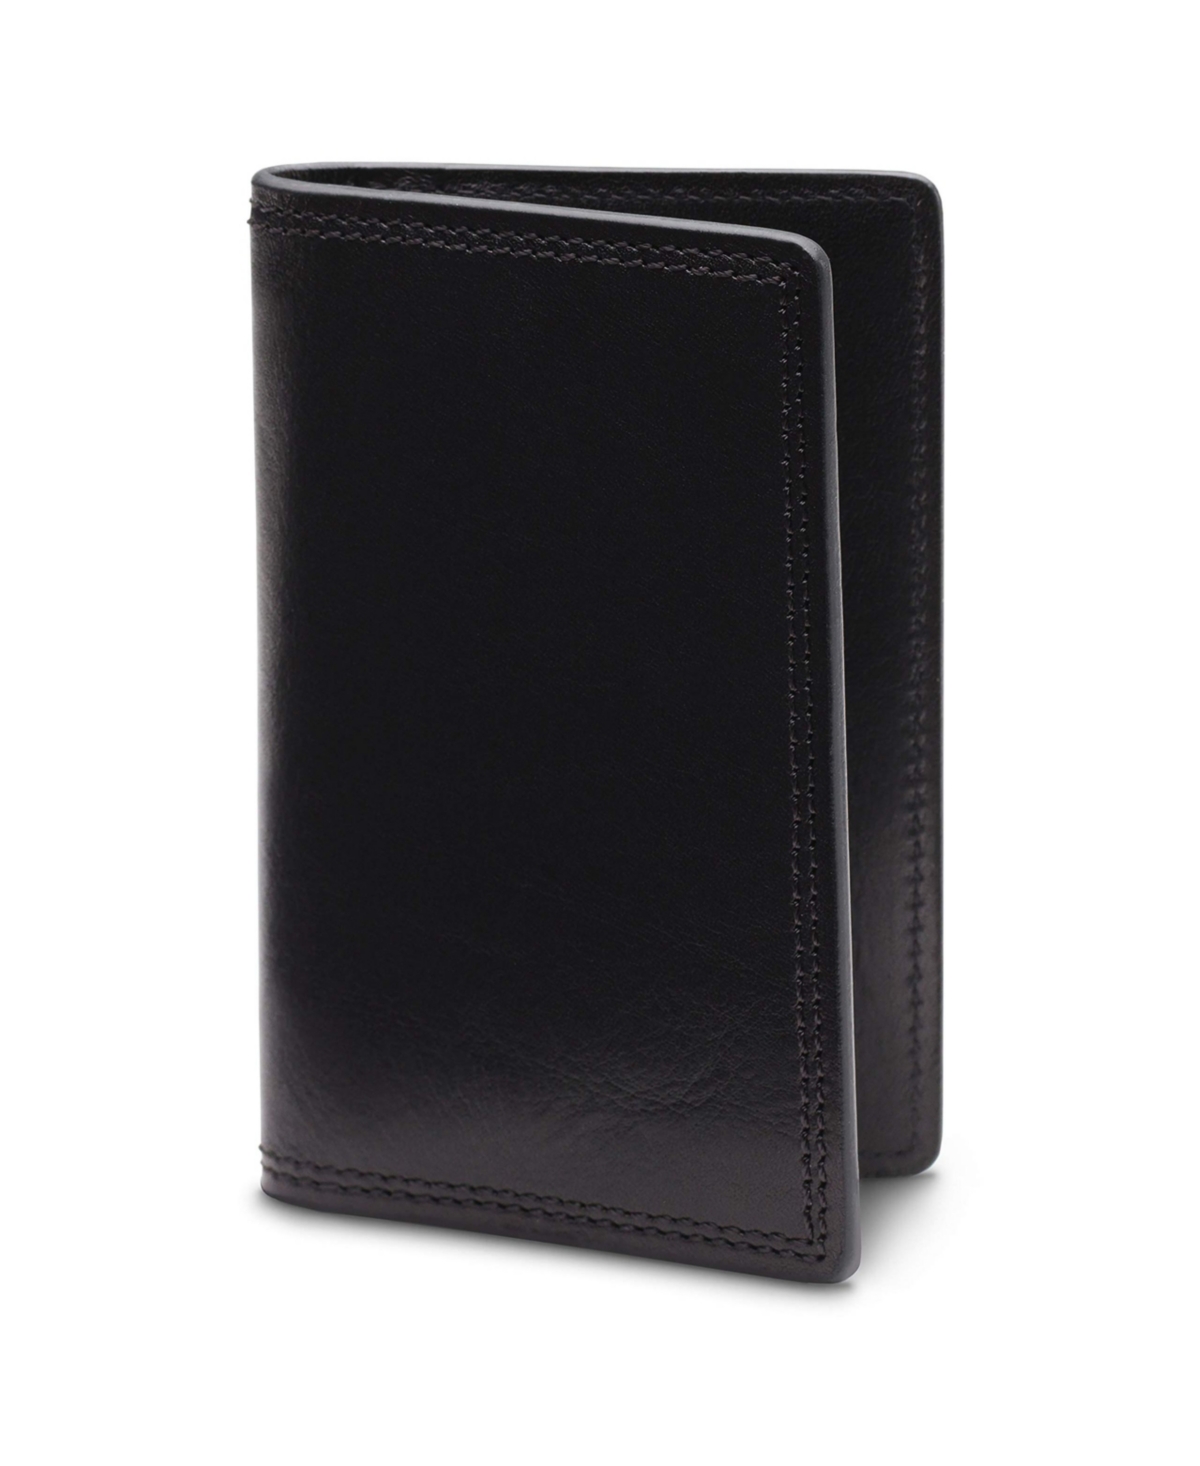 Old Leather Calling Card Case - Black